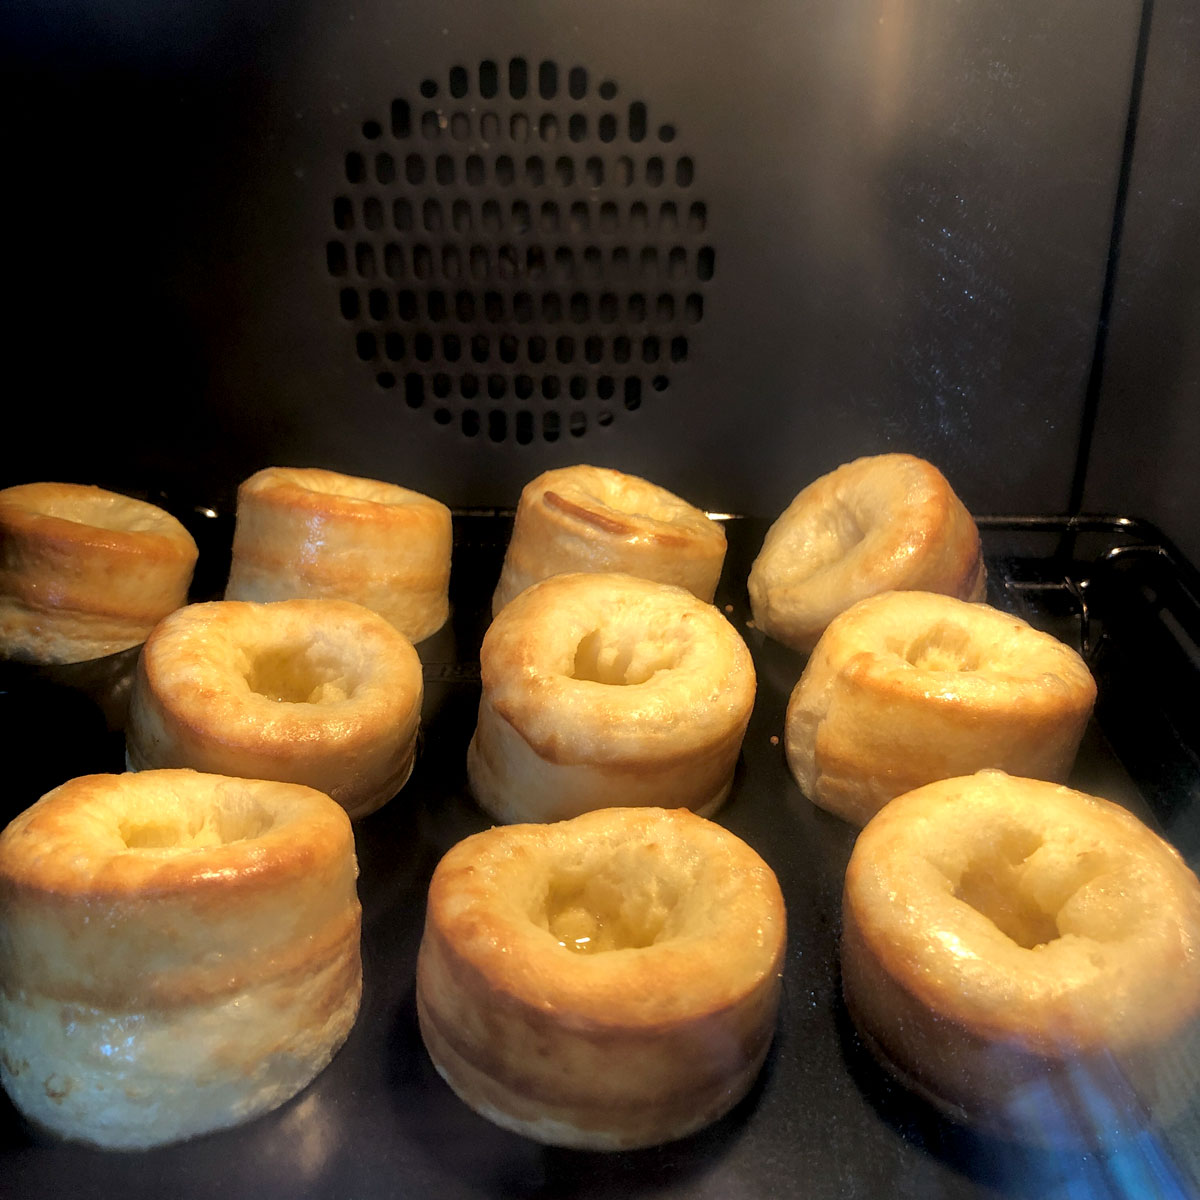 Rising Yorkshire puddings inside the oven at 250C.